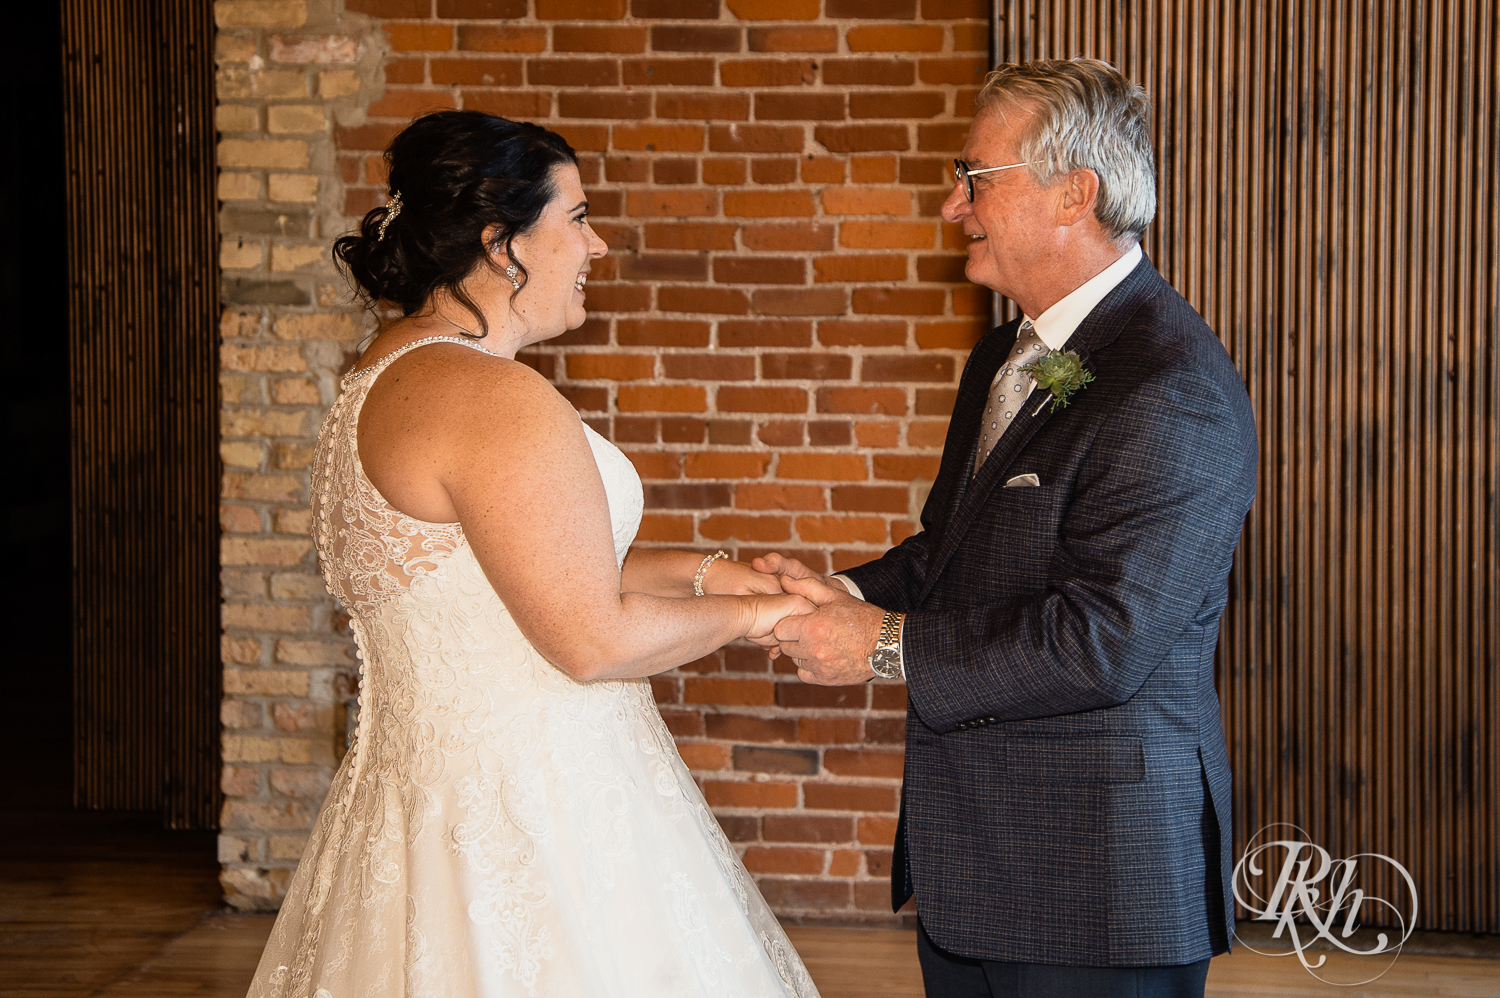 Bride and father share first look at Minneapolis Event Center in Minneapolis, Minnesota.